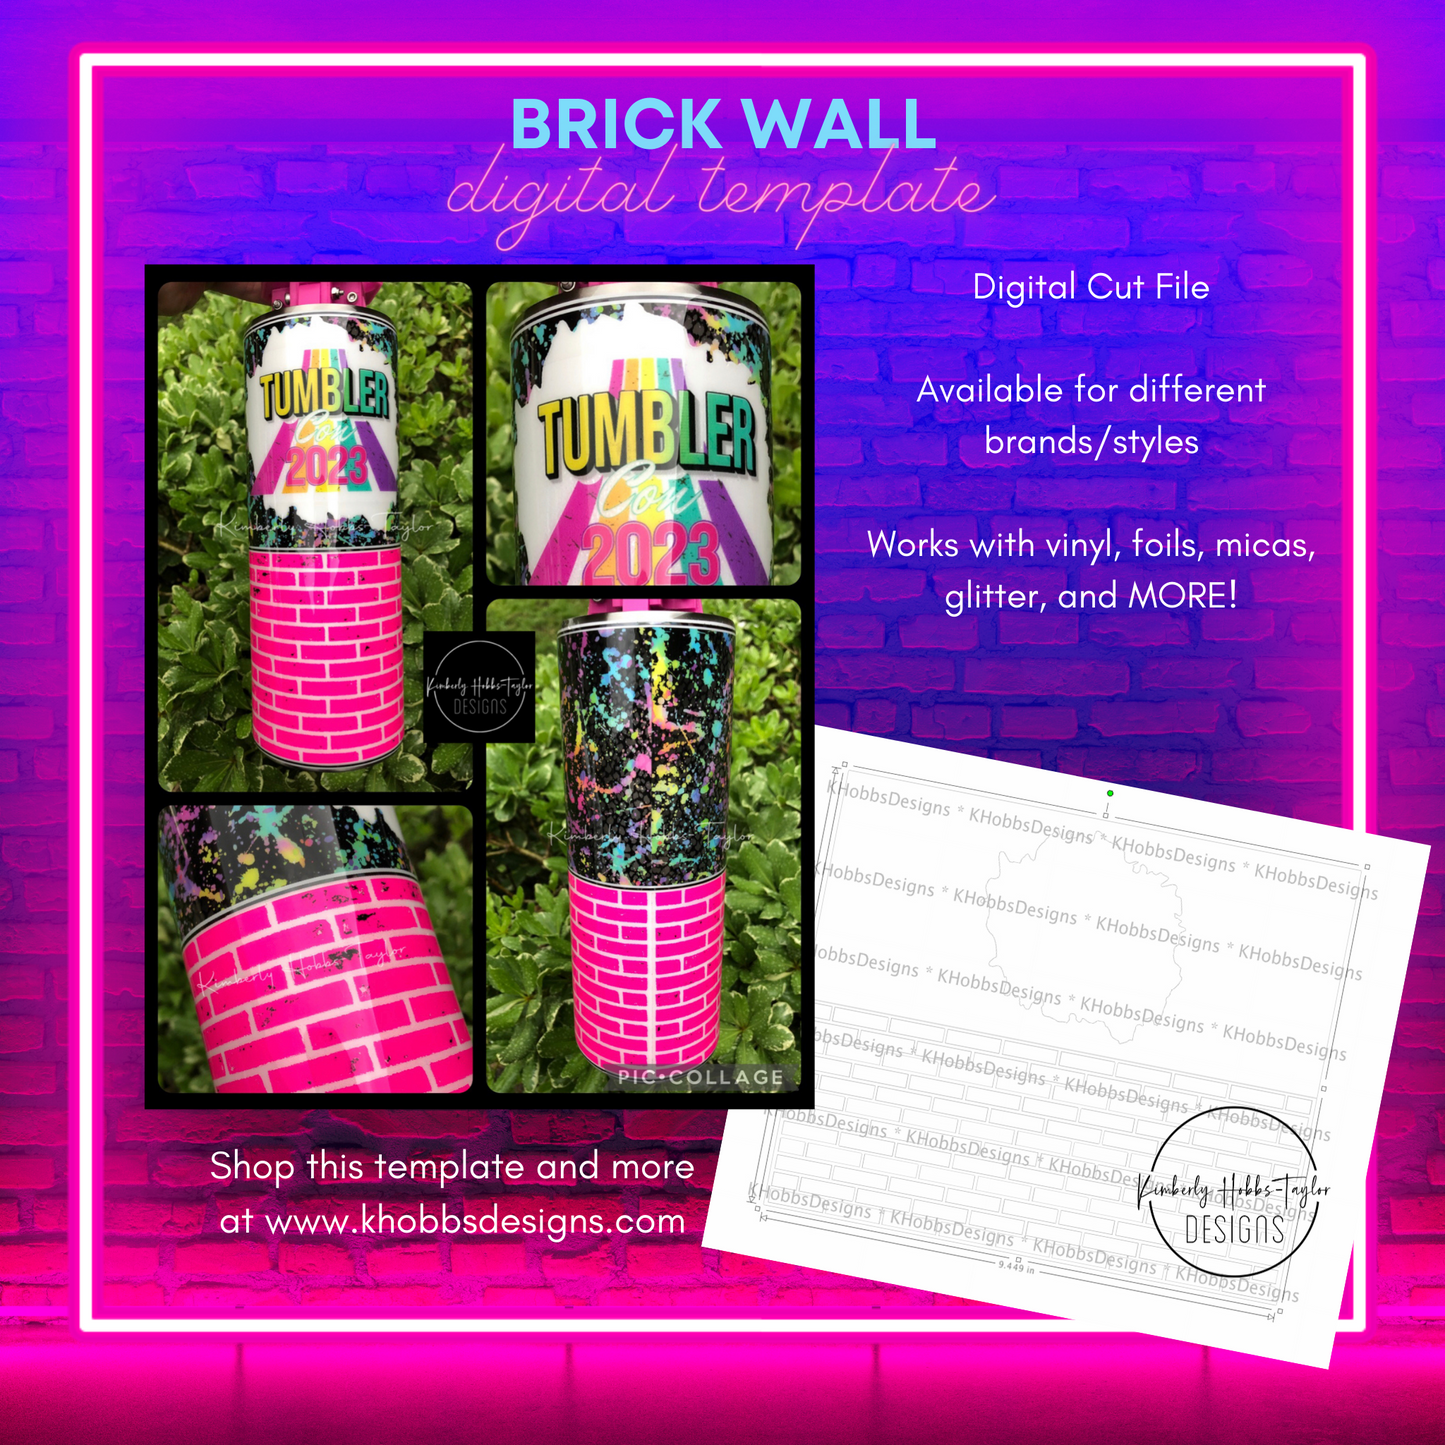 Brick Wall Template for TSM 32 Plump - Digital Cut File Only